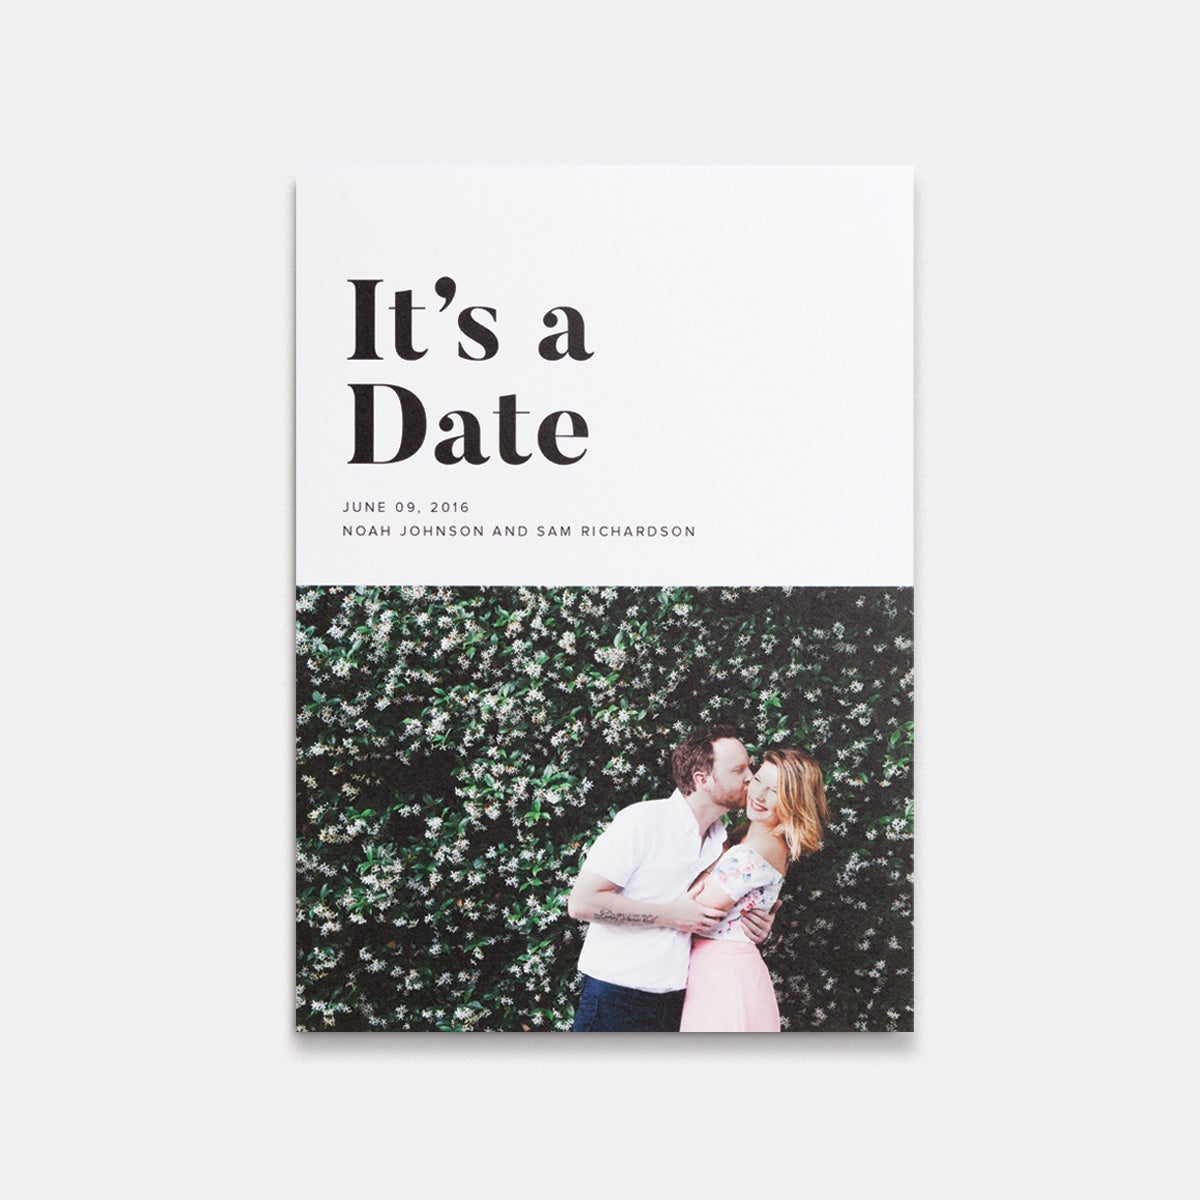 It's A Date Photo Card by Artifact Uprising | Cards